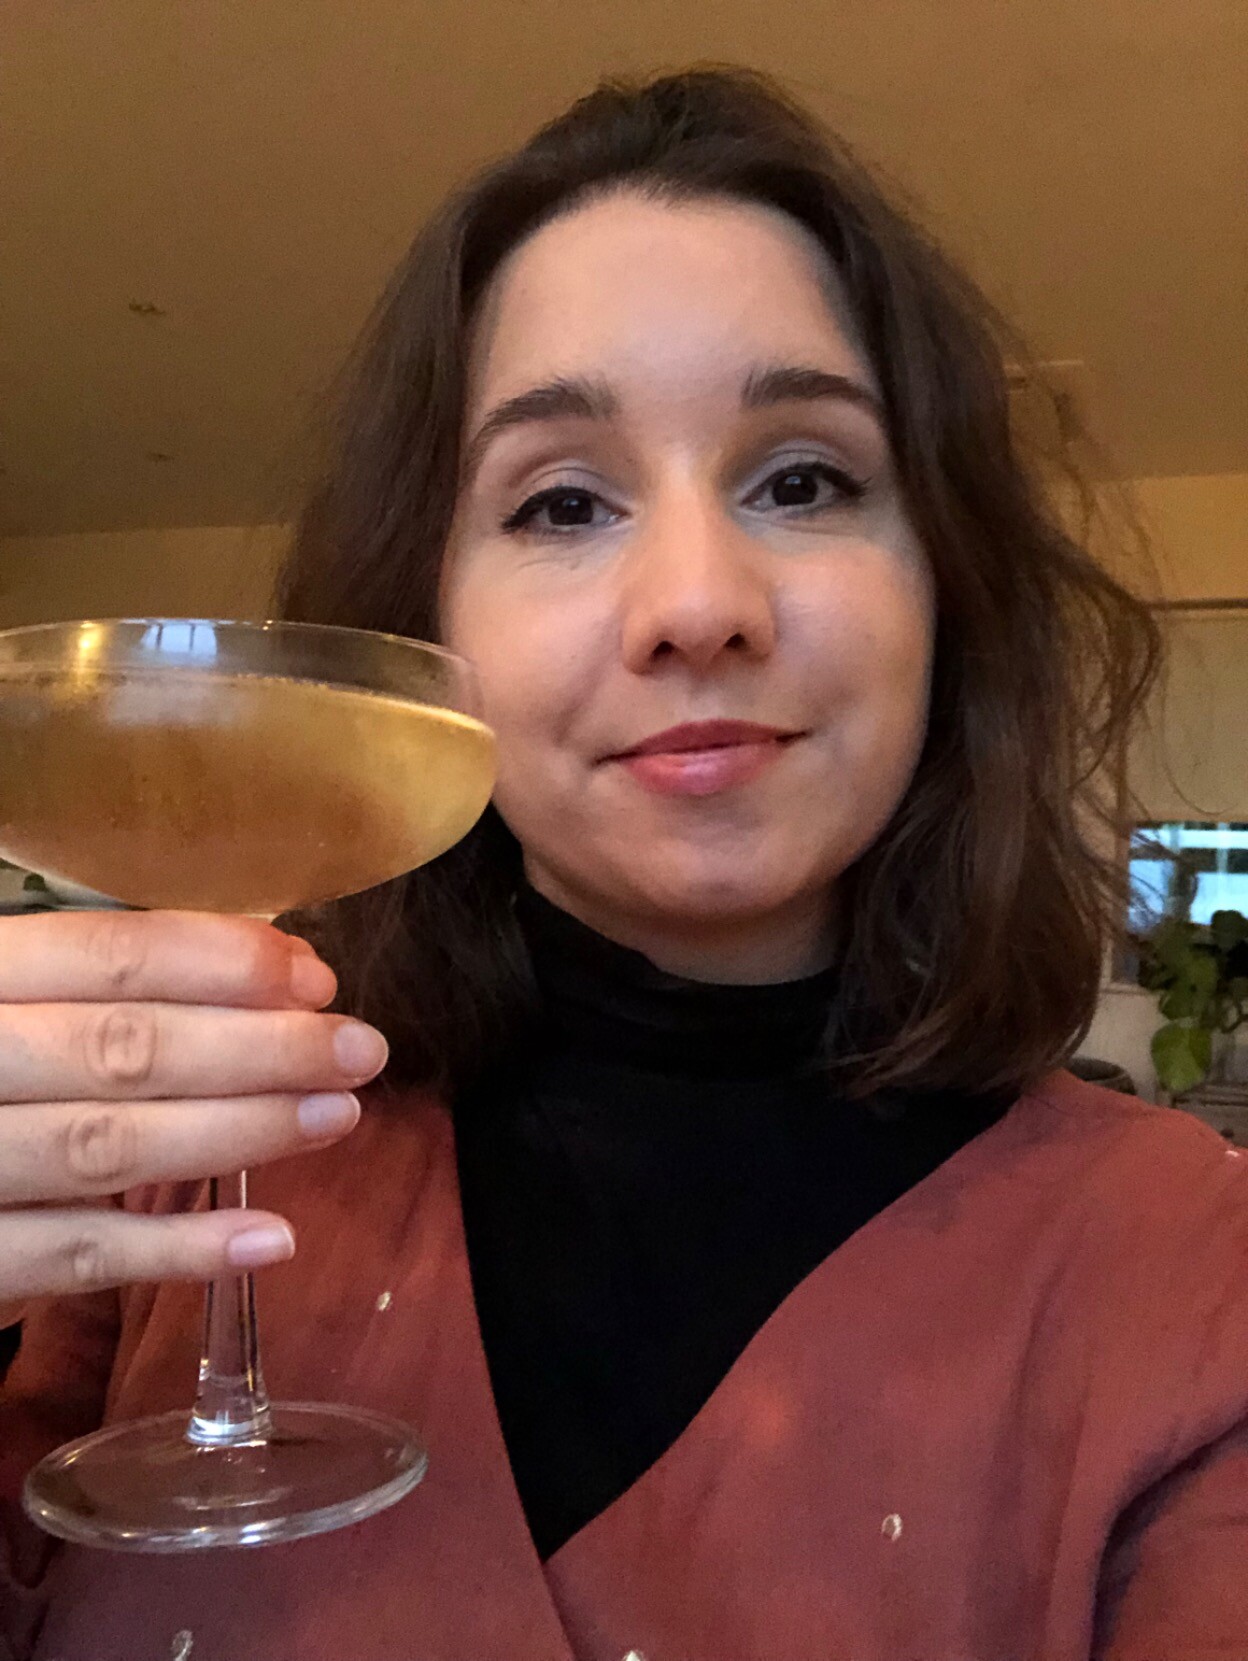 Selfie of me with a saucer glass of champagne.